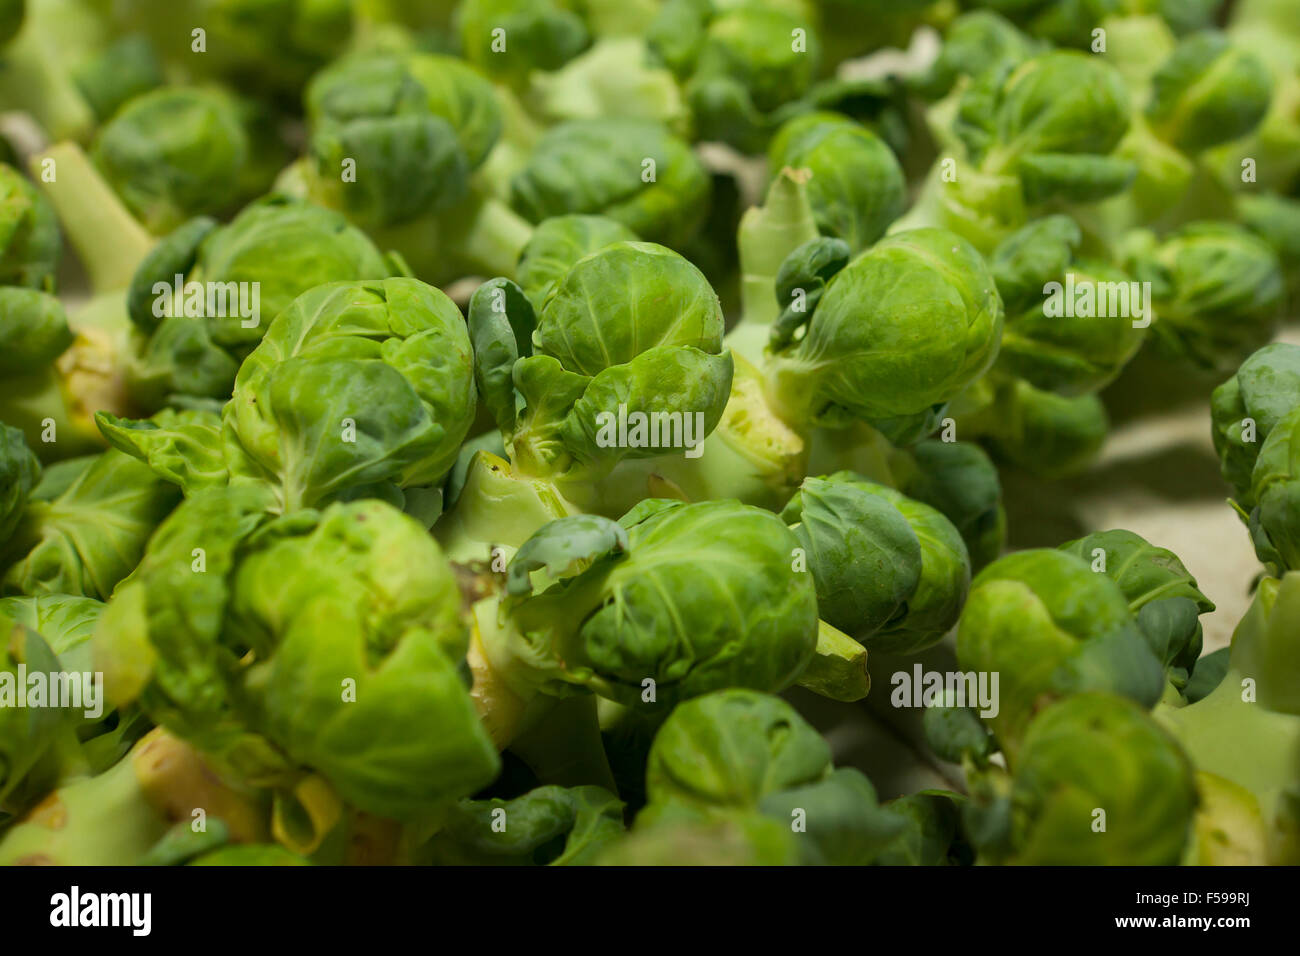 Brussels sprouts (Brassica oleracea) on stalk at farmers market - Pennsylvania USA Stock Photo